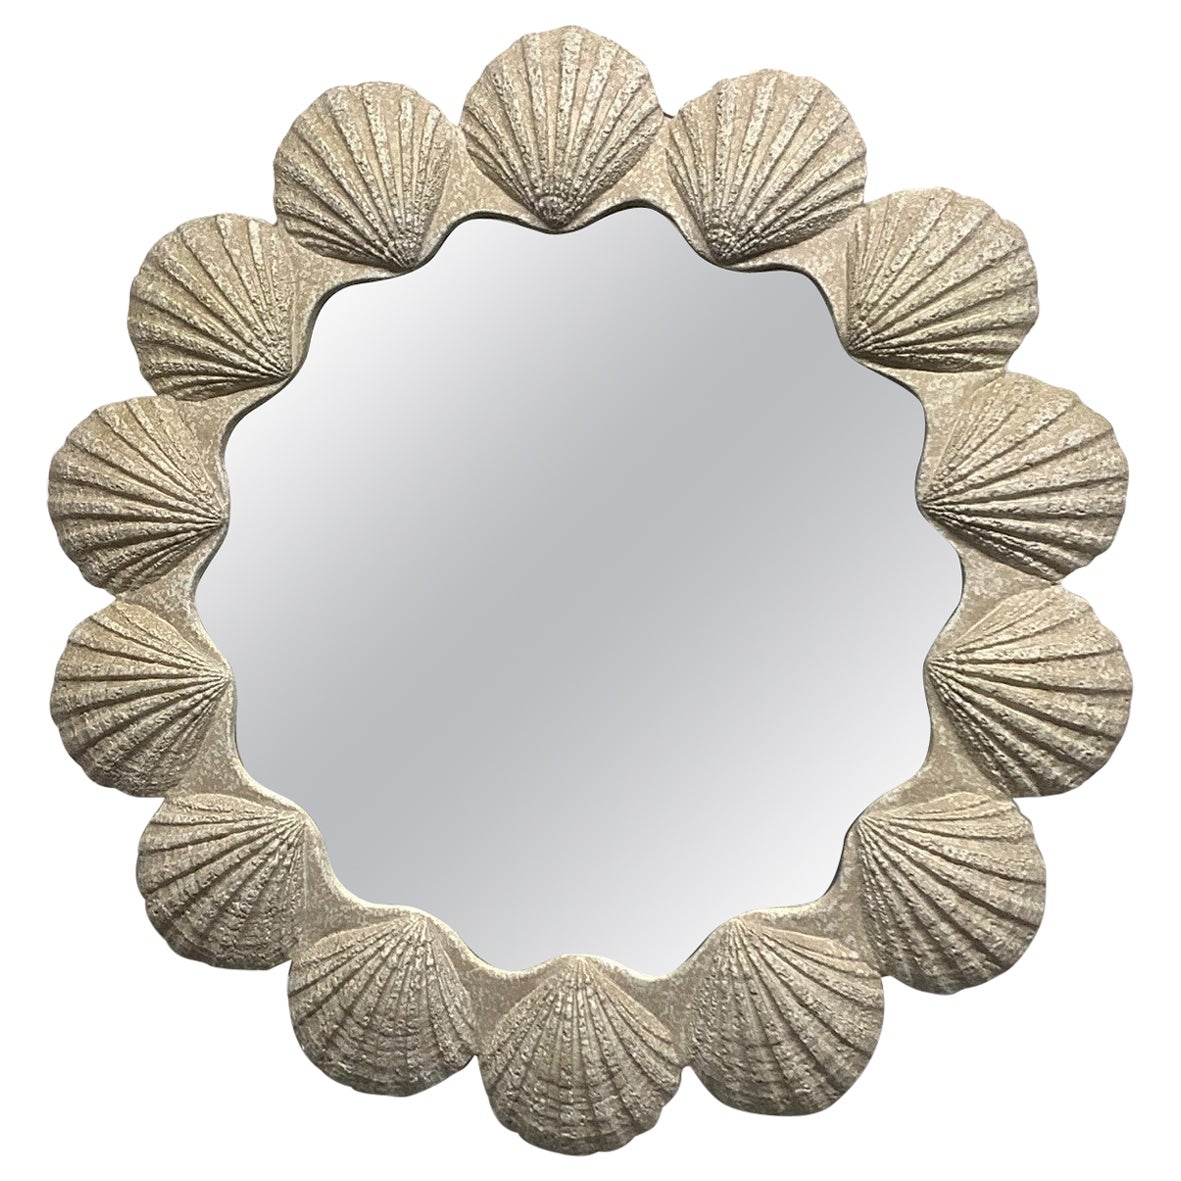 Large Plaster Shell Form Mirror For Sale